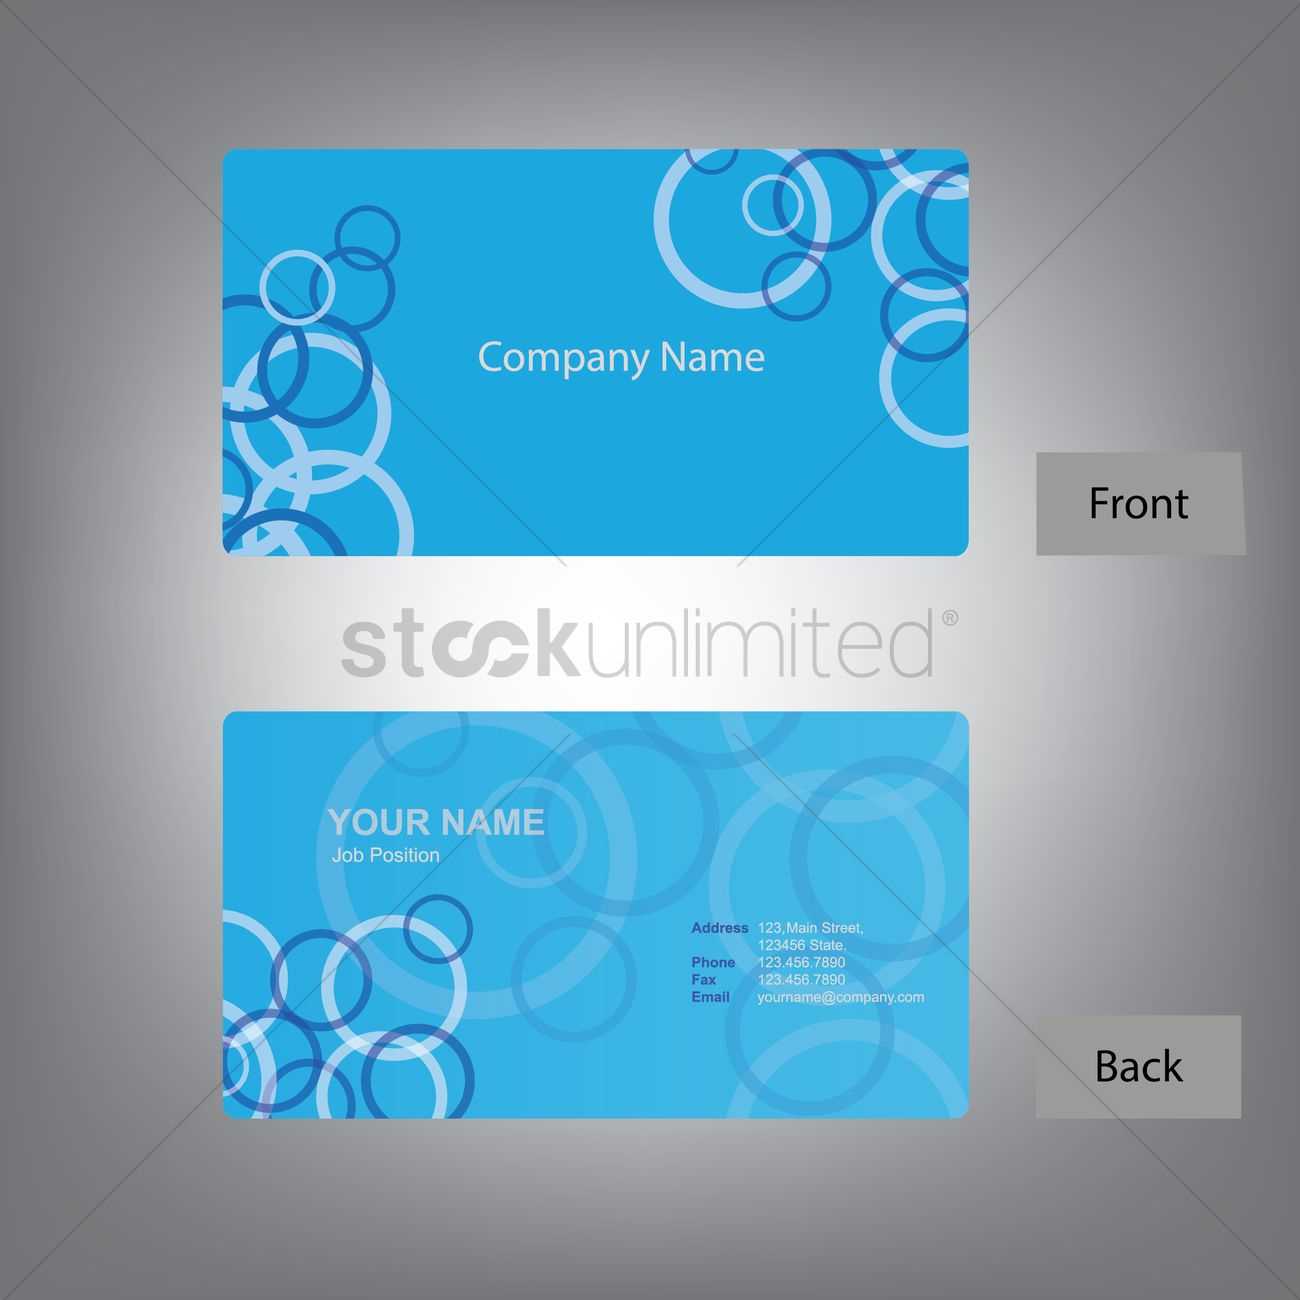 Front And Back Business Card Template Word ] – Card Template Inside Front And Back Business Card Template Word